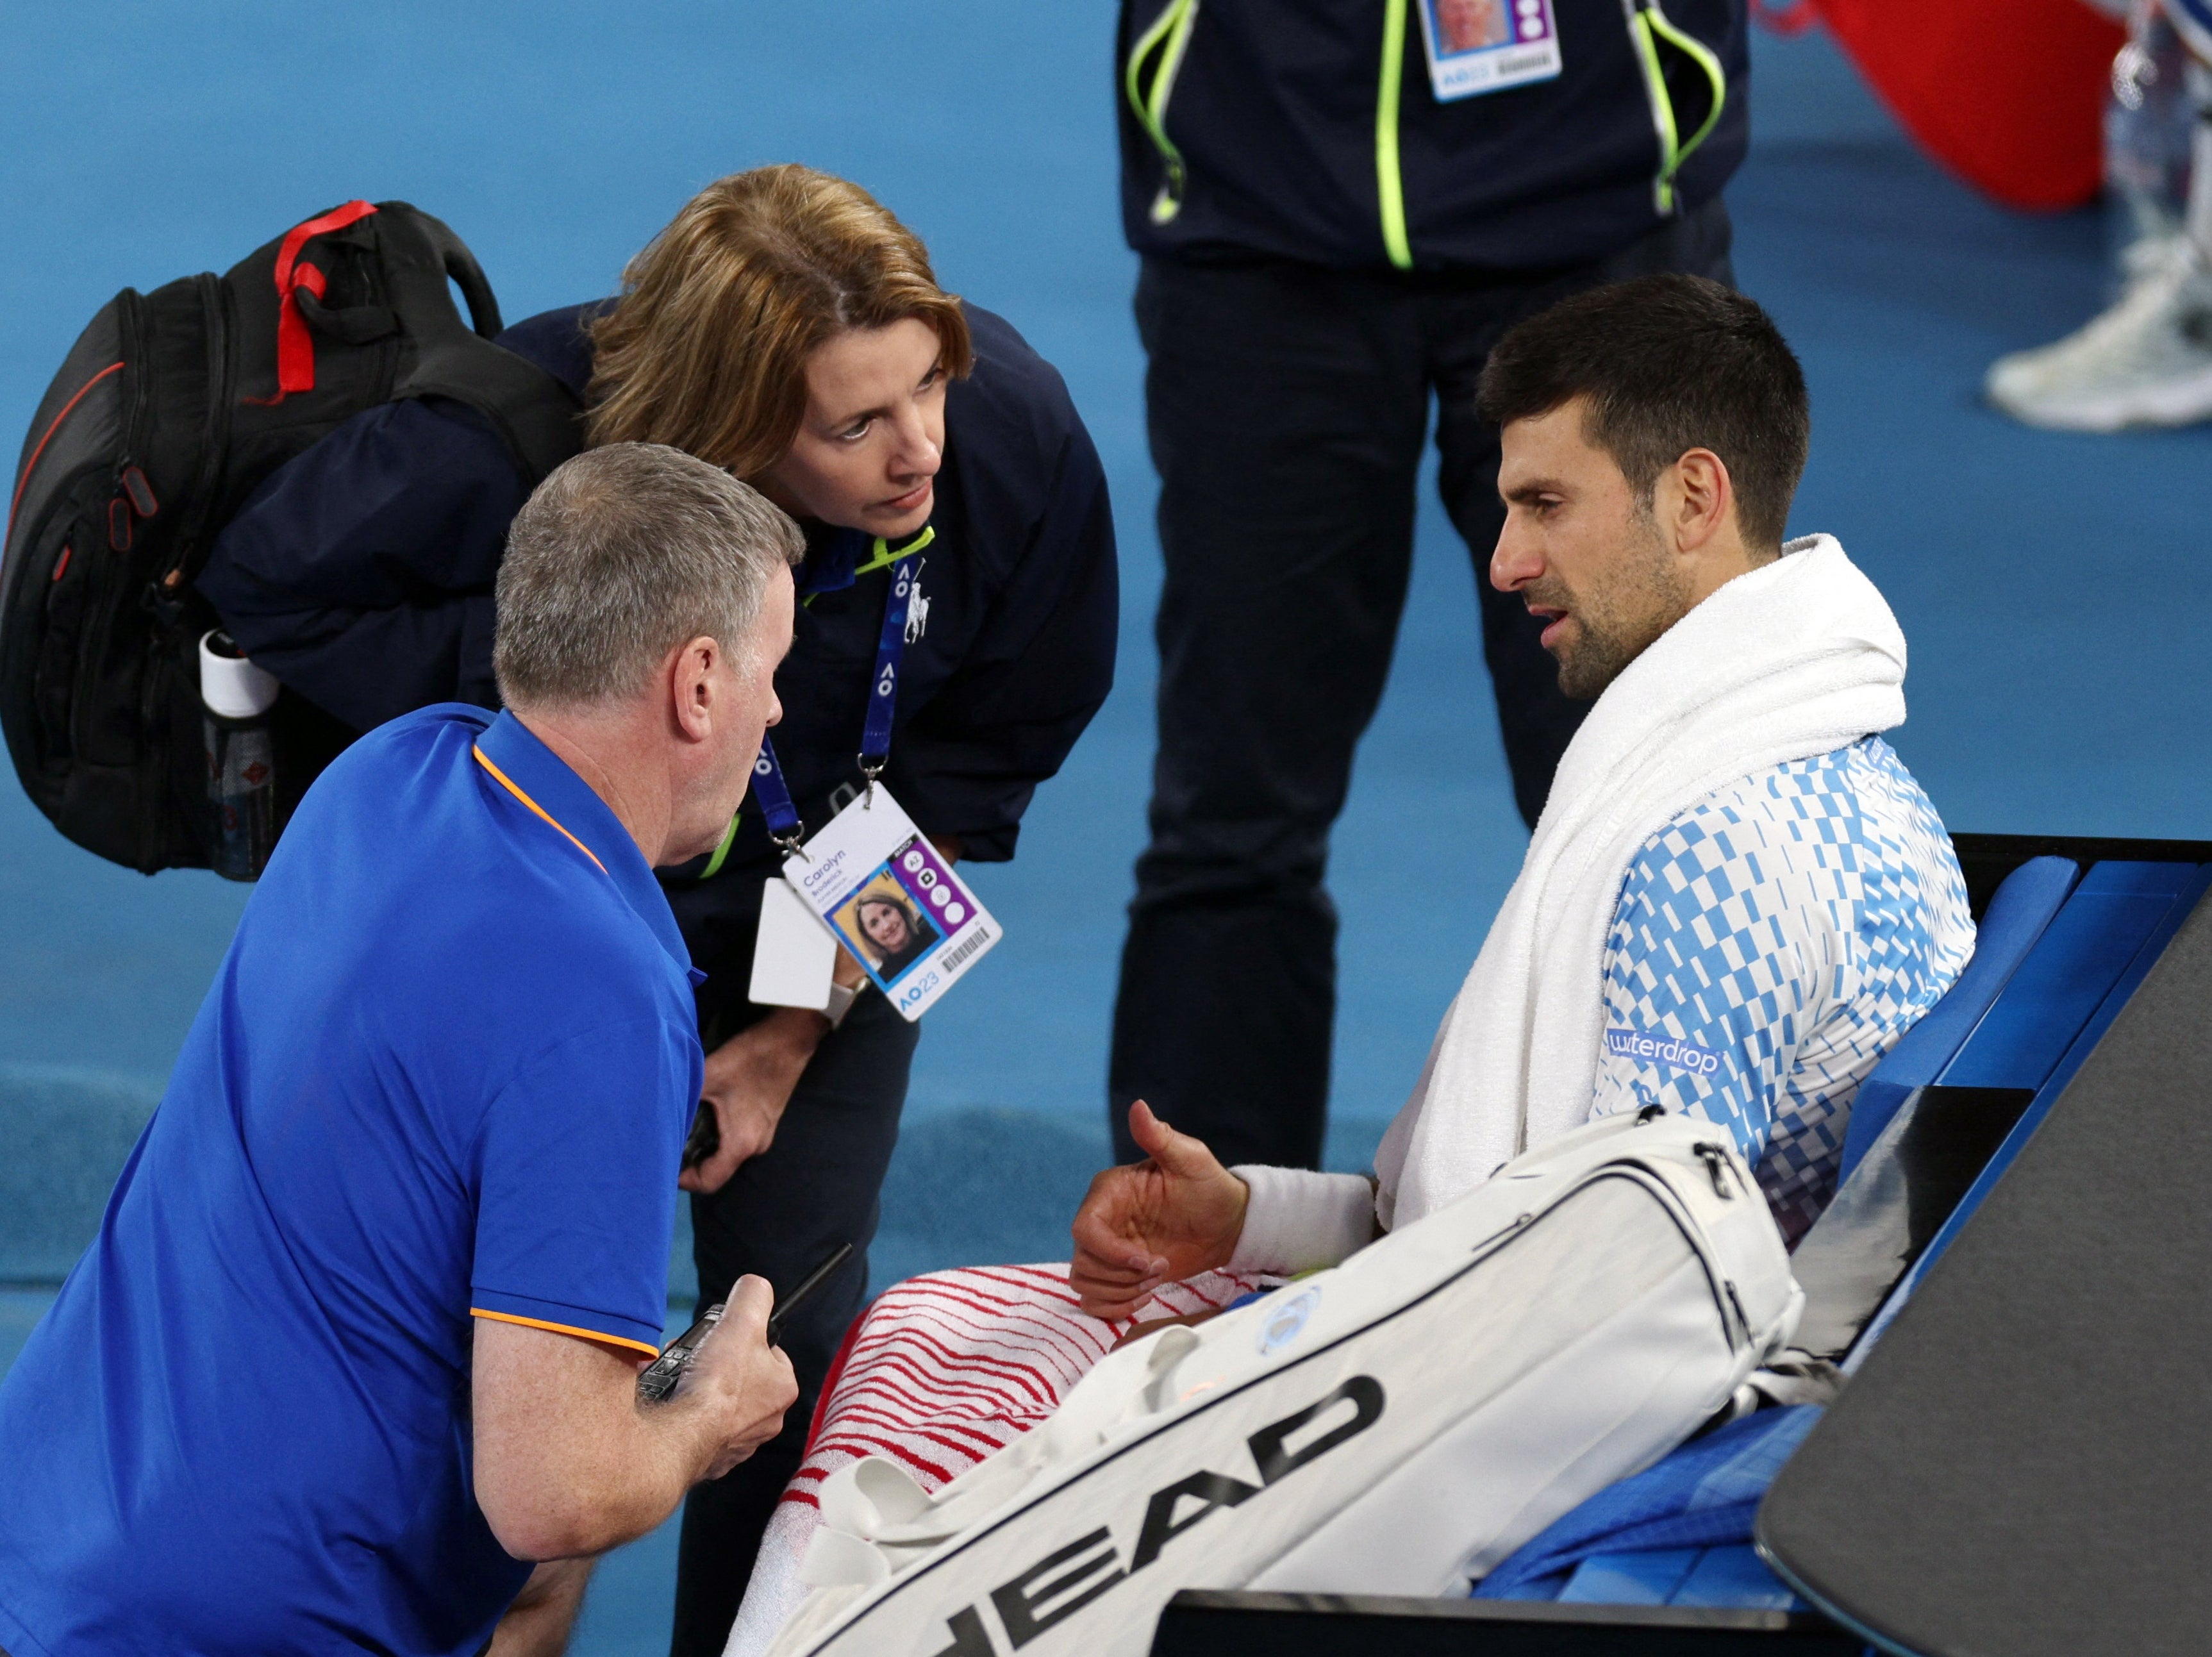 Novak Djokovic is given treatment for his hamstring injury